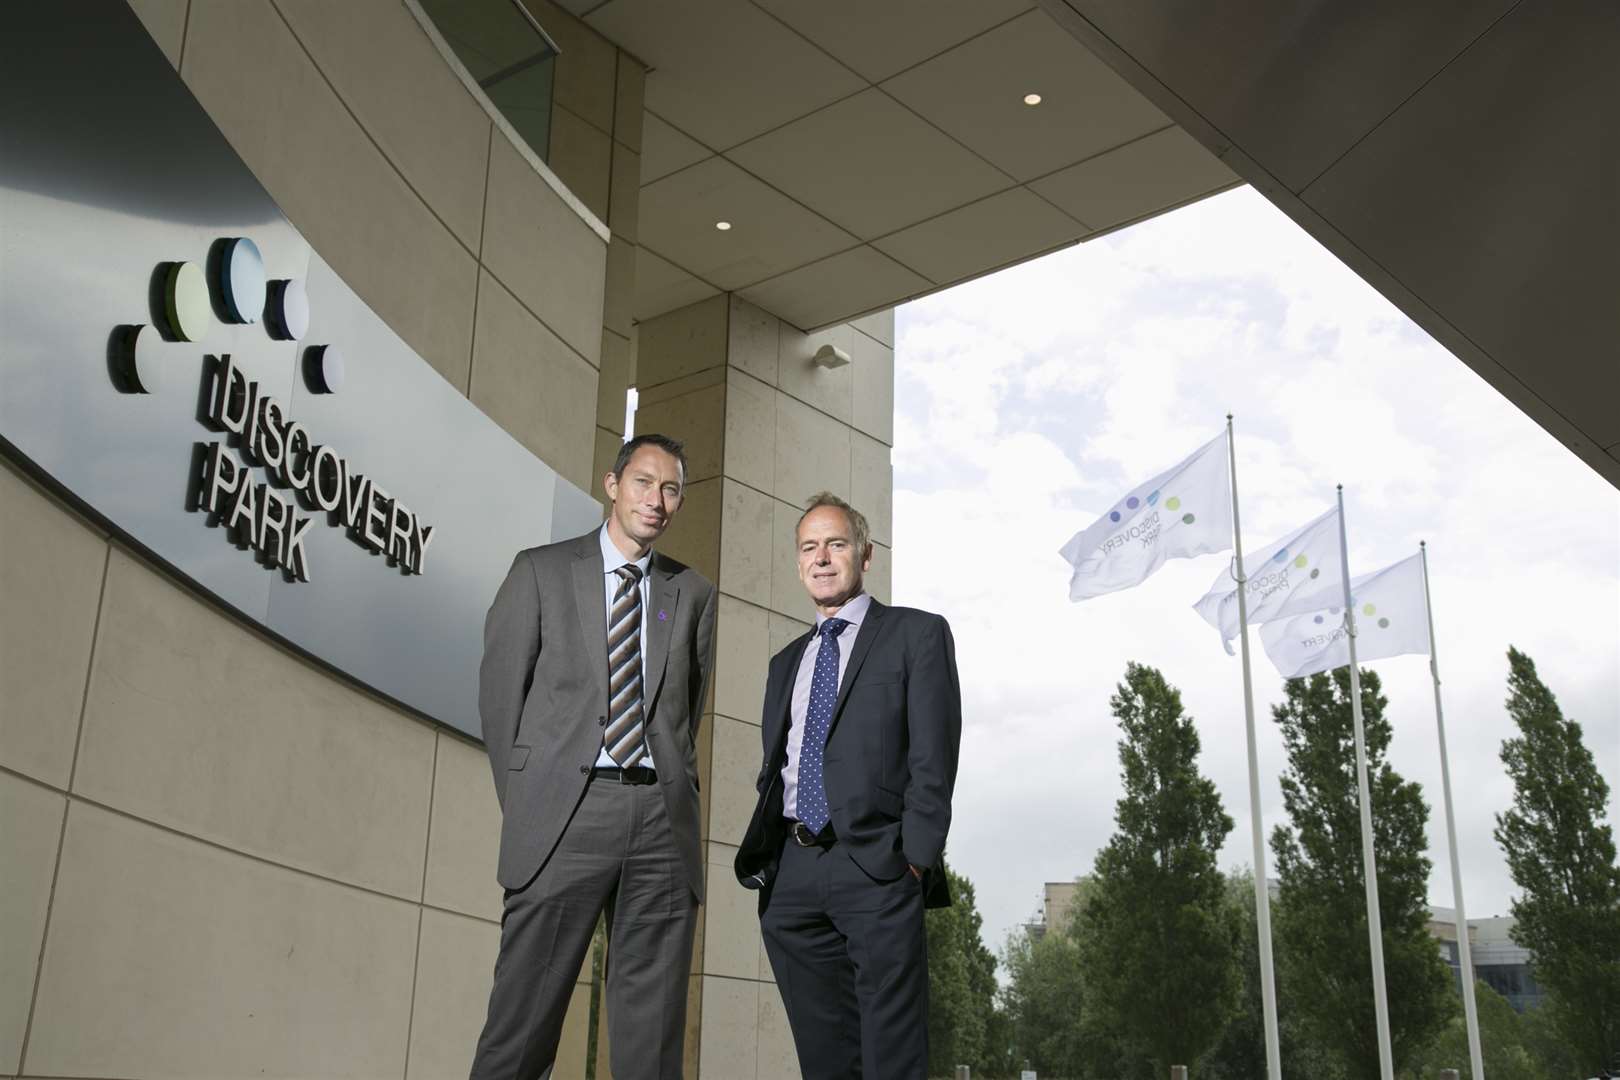 Principal of East Kent College Graham Razey and managing director of Discovery Park, Paul Barber.